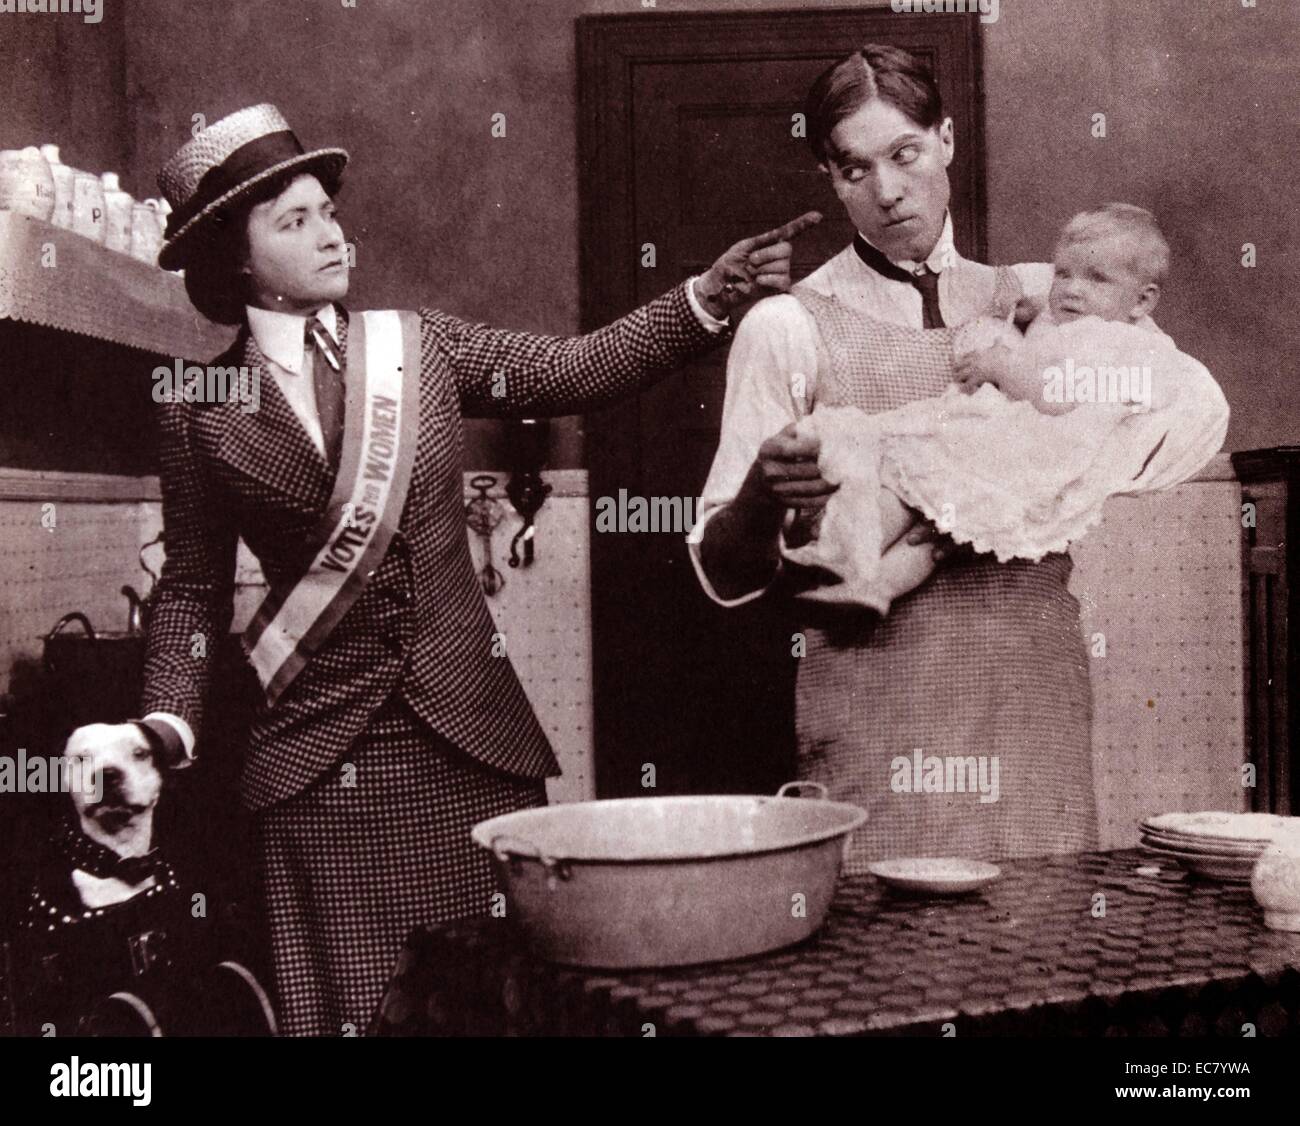 Films of the Nickelodeon Age.  The Suffragette, Edison, c 1912.  Films of the period ridiculed the 'unwomanly woman' who wanted to vote.  Here one of them tells the dog to keep watch on her husband and see that he minds the baby and gets dinner while she is out speech-making. Stock Photo